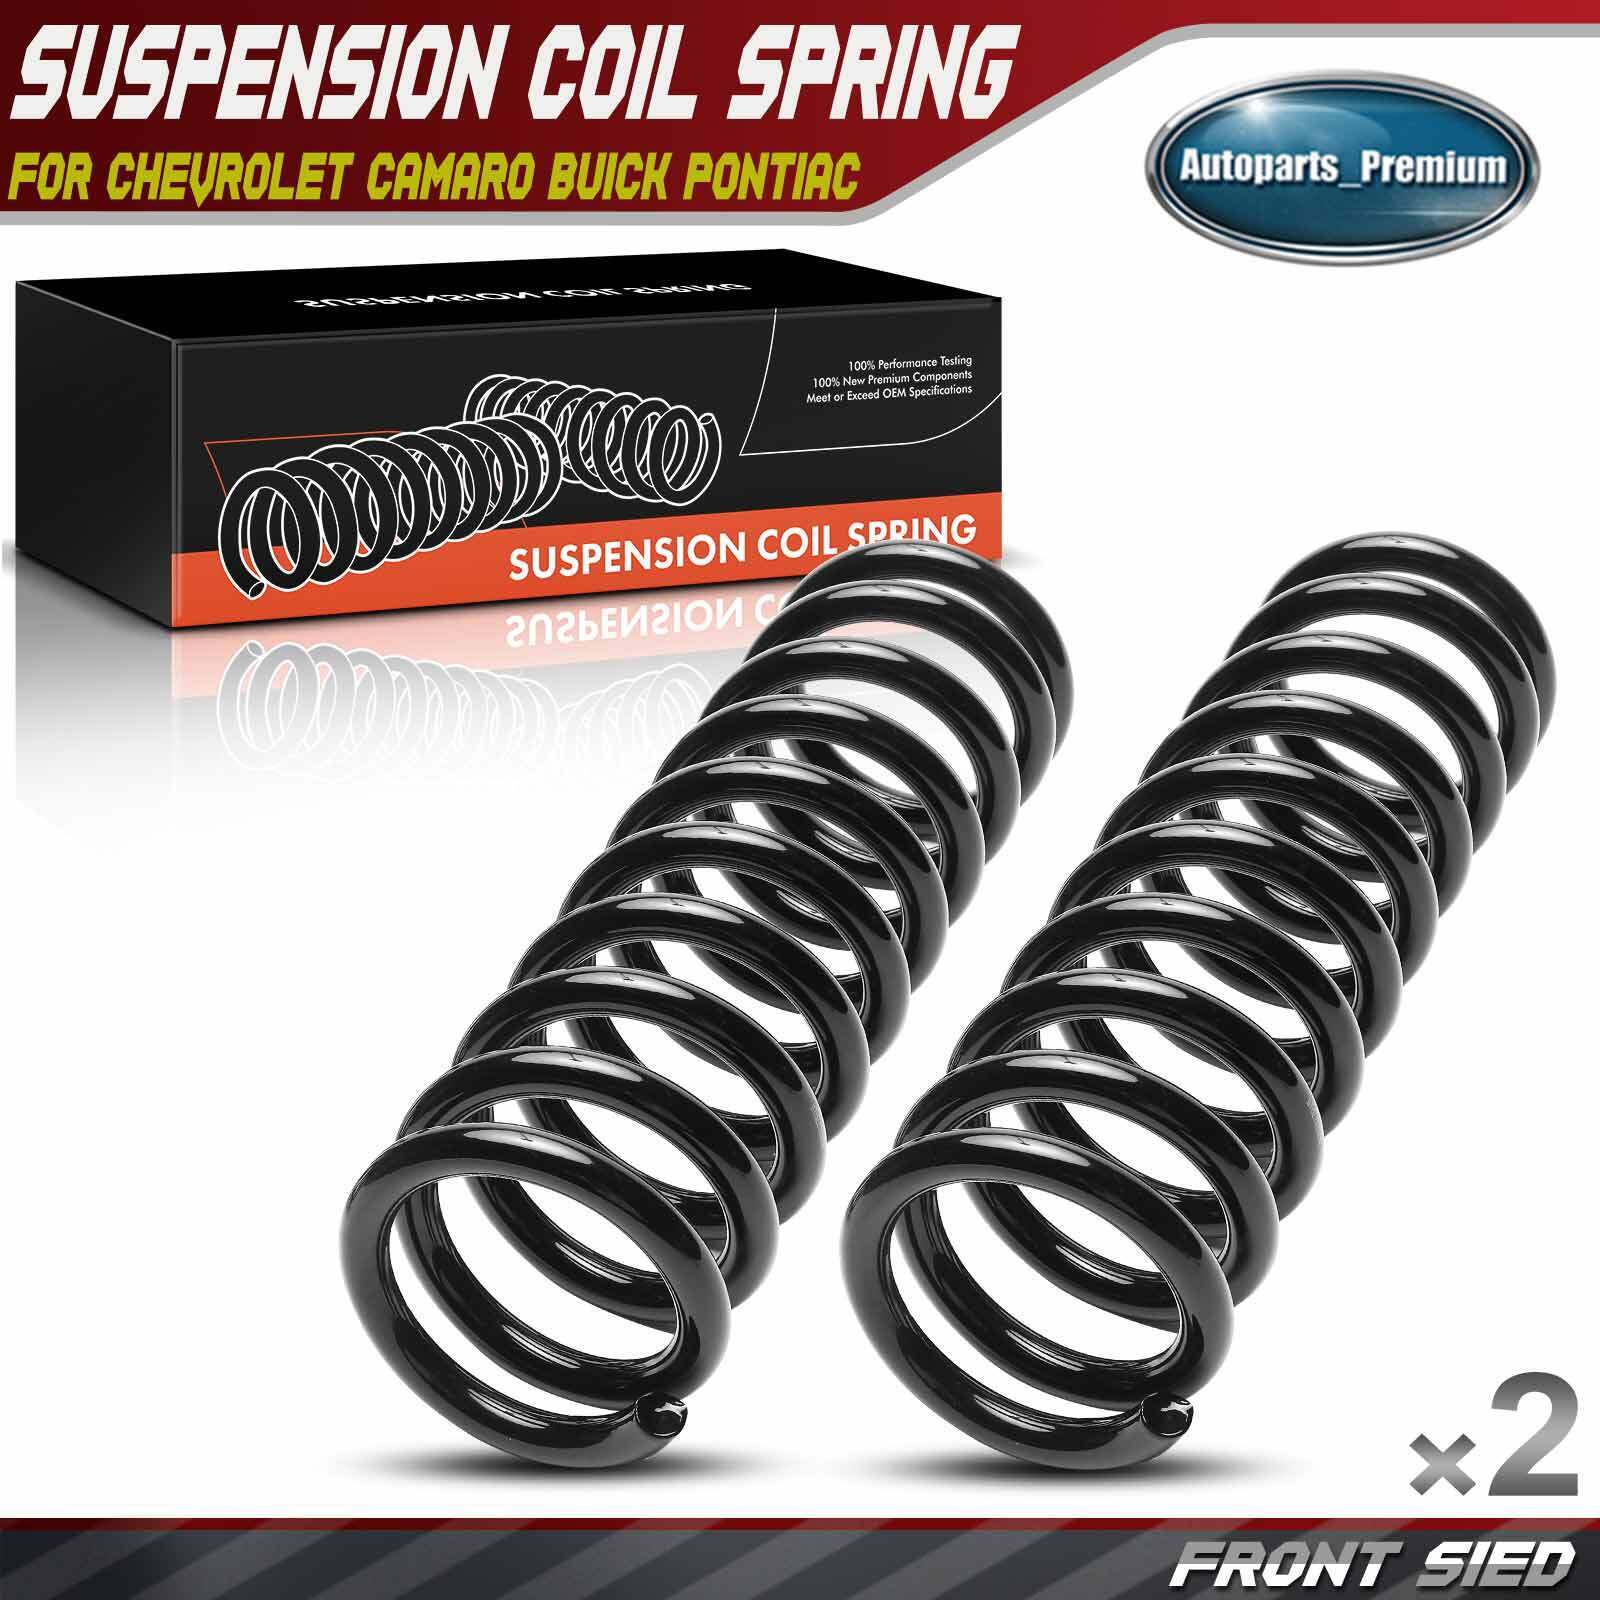 2pcs Front Coil Springs for Chevrolet Camaro Chevy II Buick Apollo Pontiac Olds